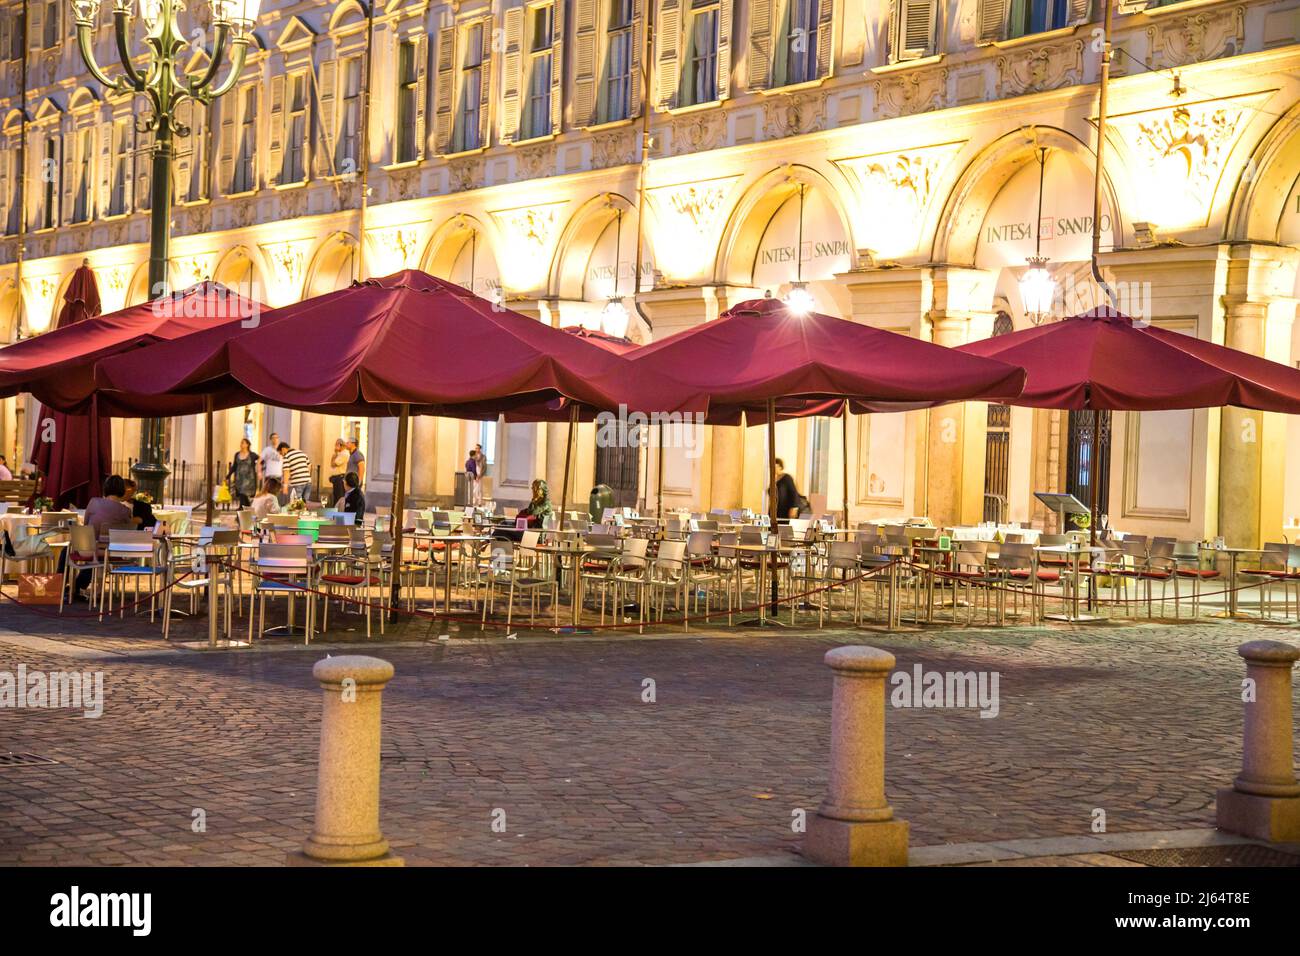 Cafe in a piazza in Turin at night. Stock Photo